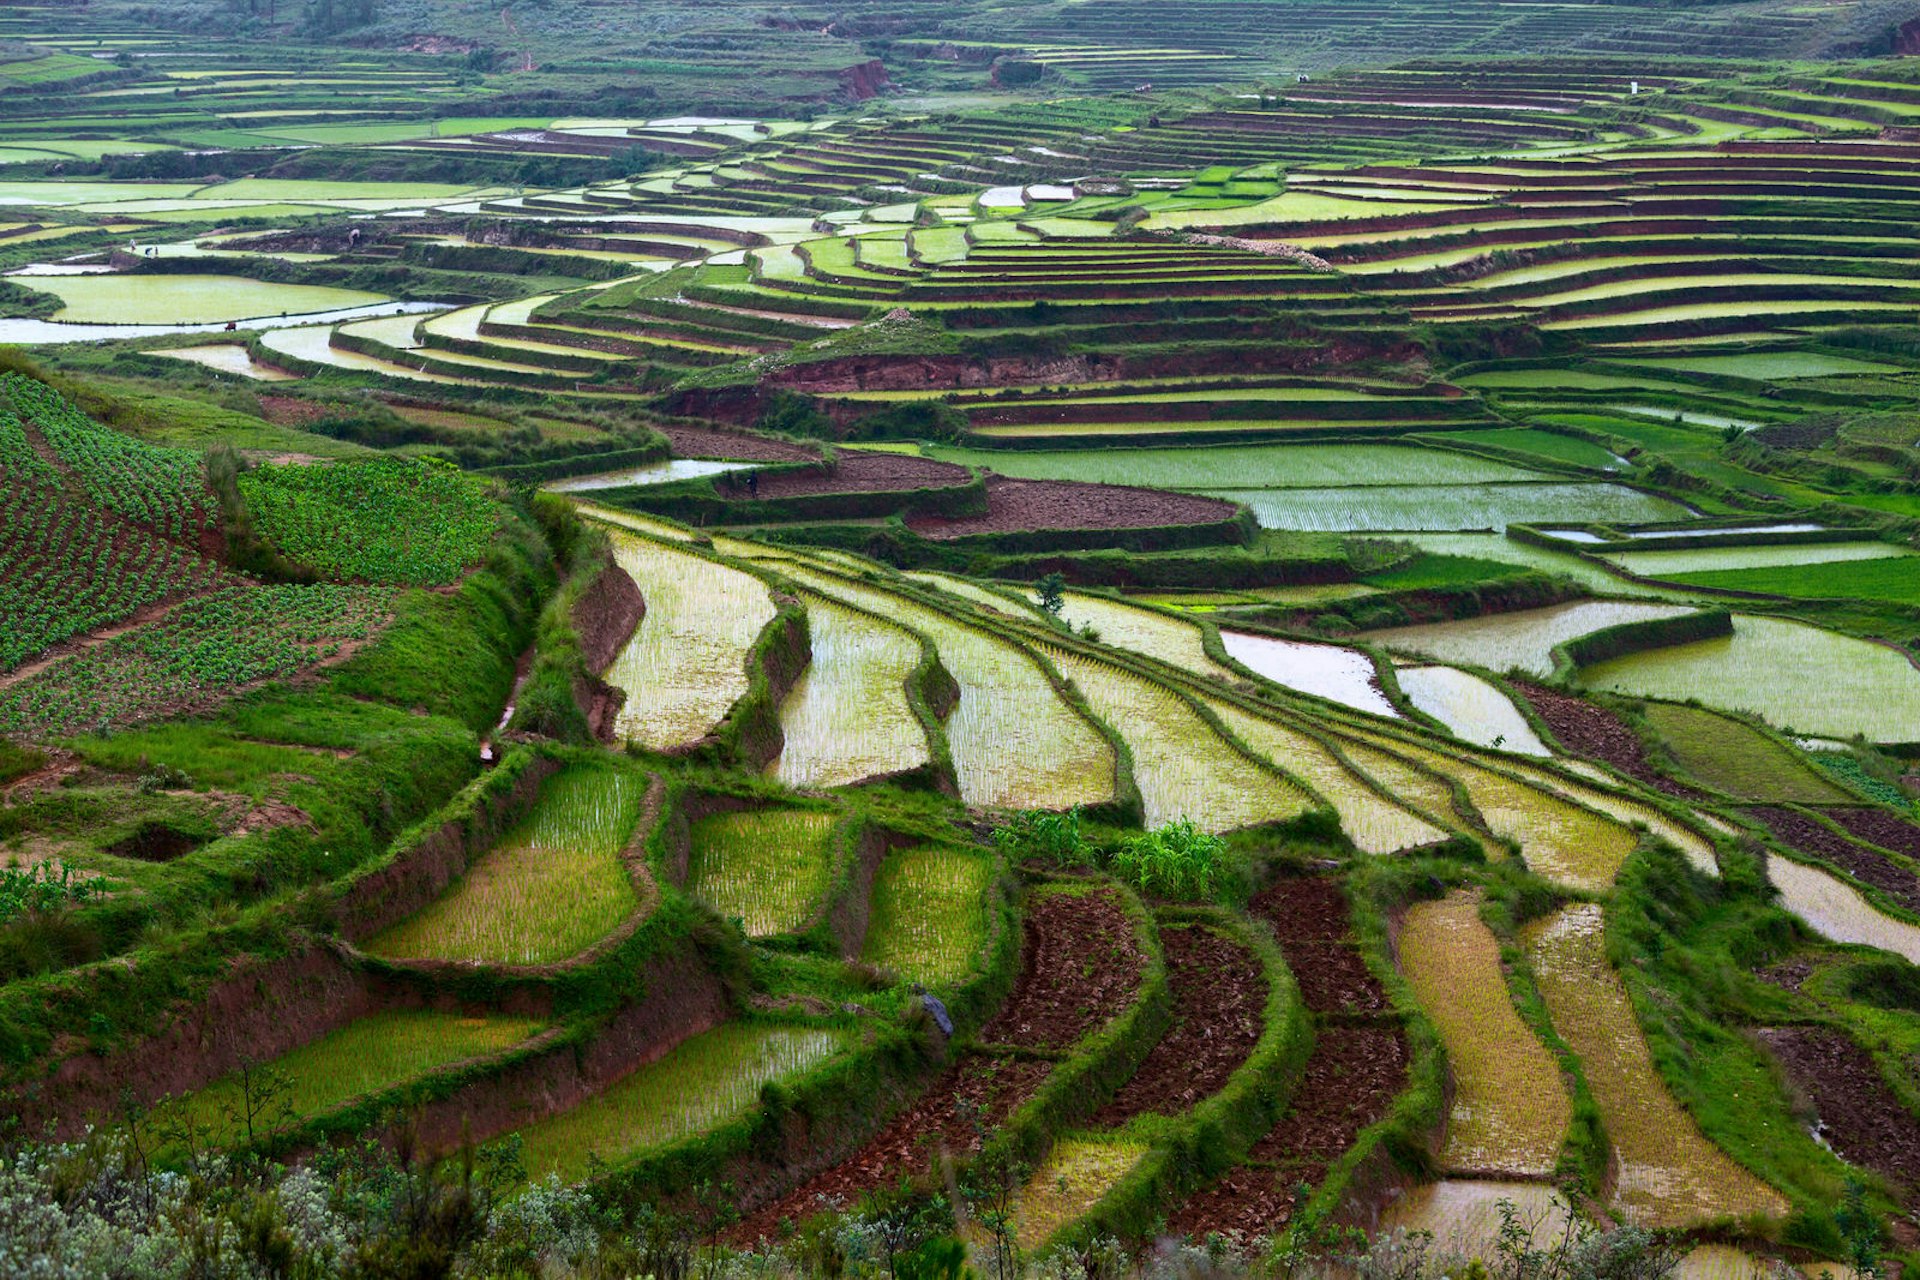 Terraced rice fields in Madagascar © mihtlander / Getty Images